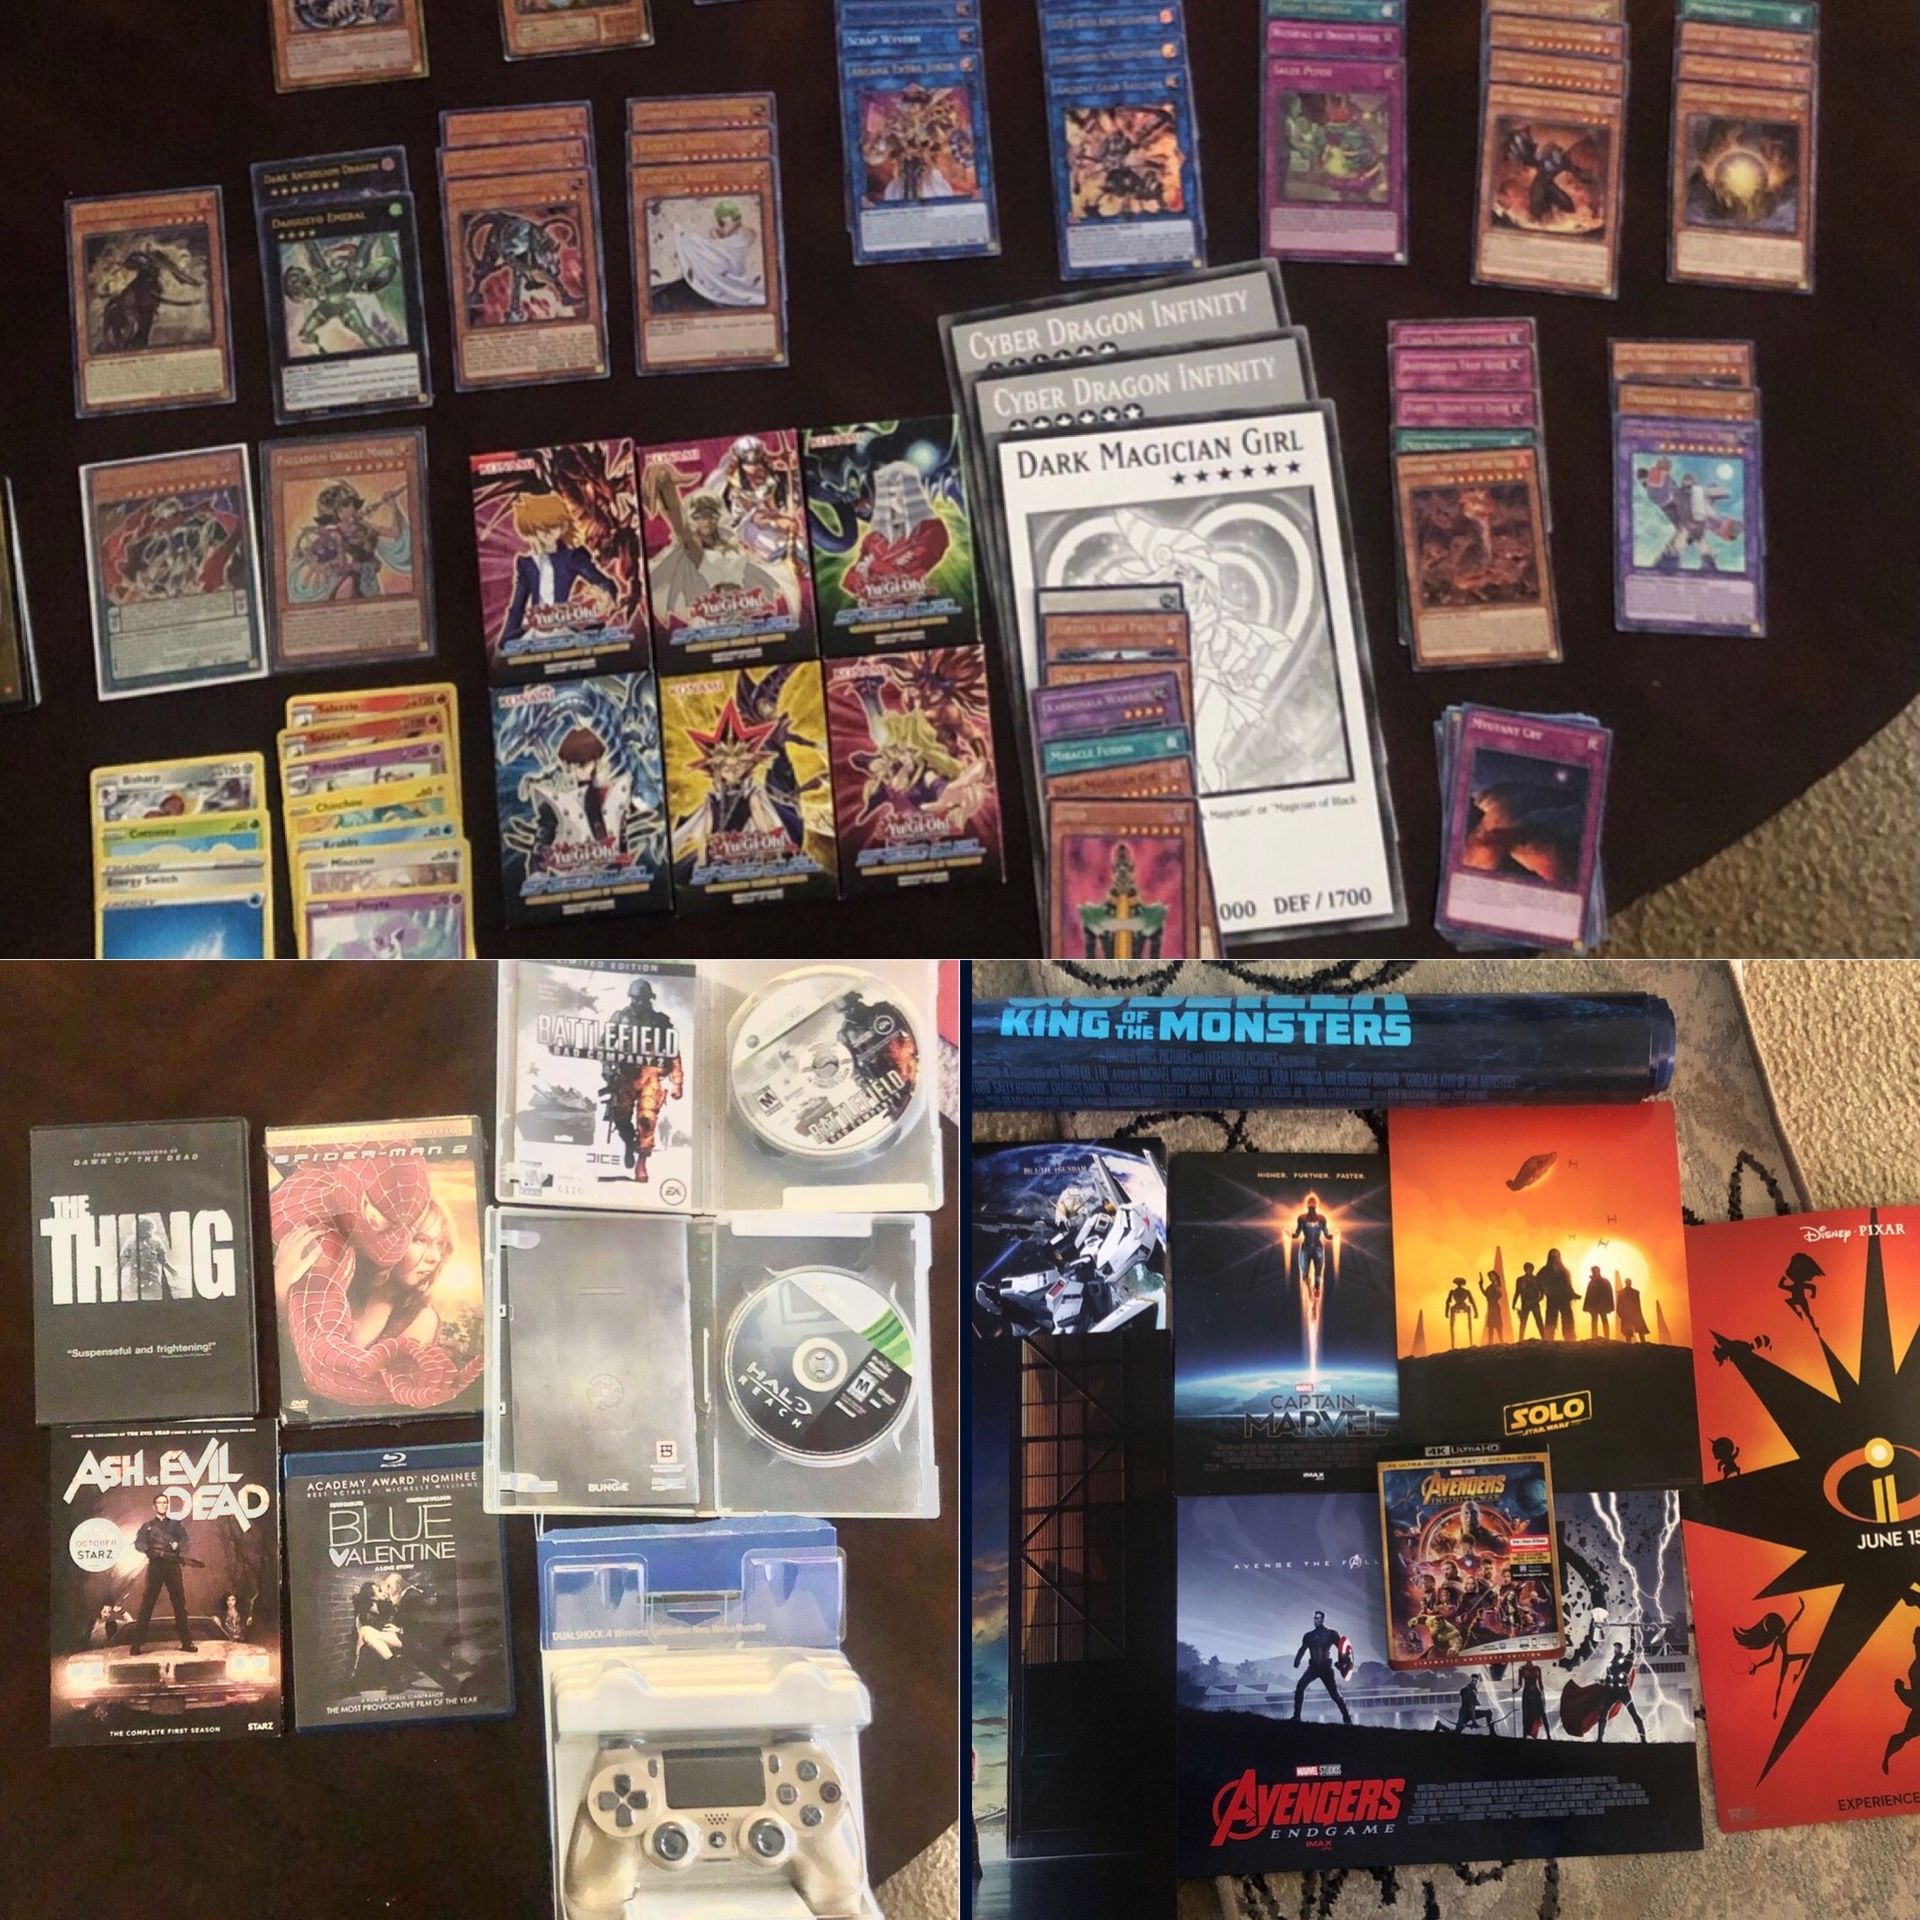 PS4 Controller Games Posters DVD Yugioh Lots